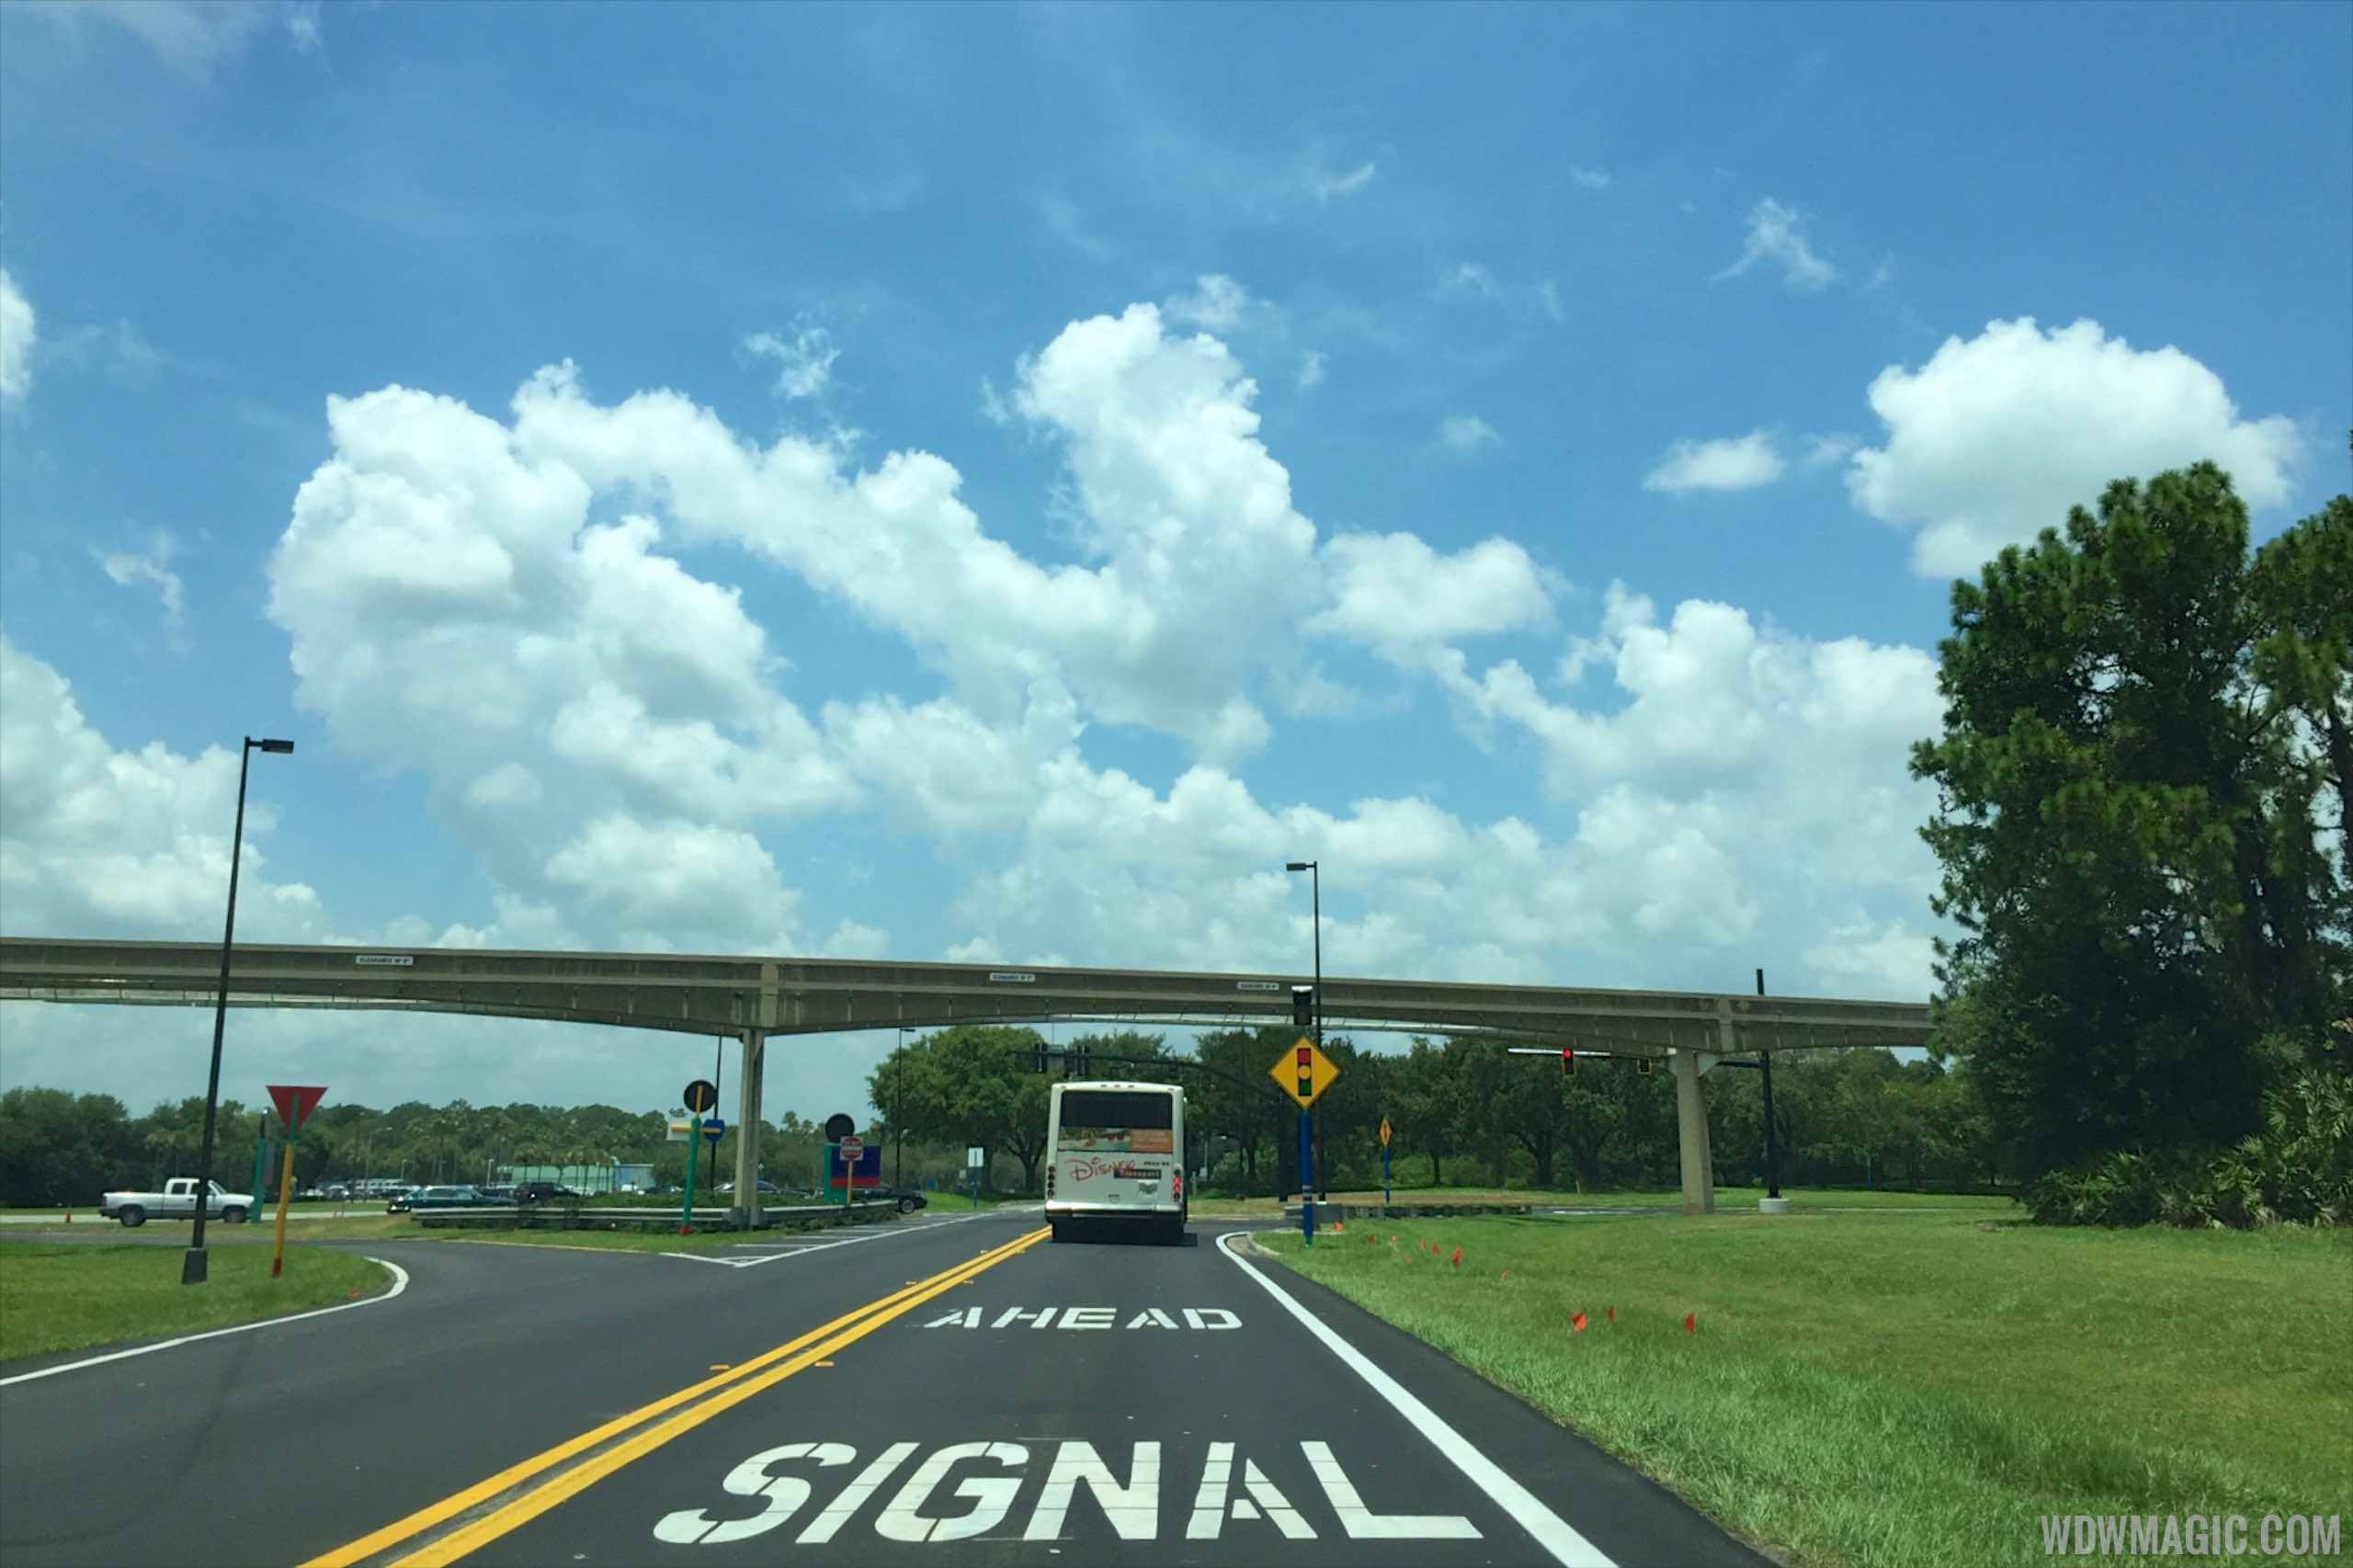 New traffic lights just north of the Magic Kingdom parking plaza at the TTC are now operational